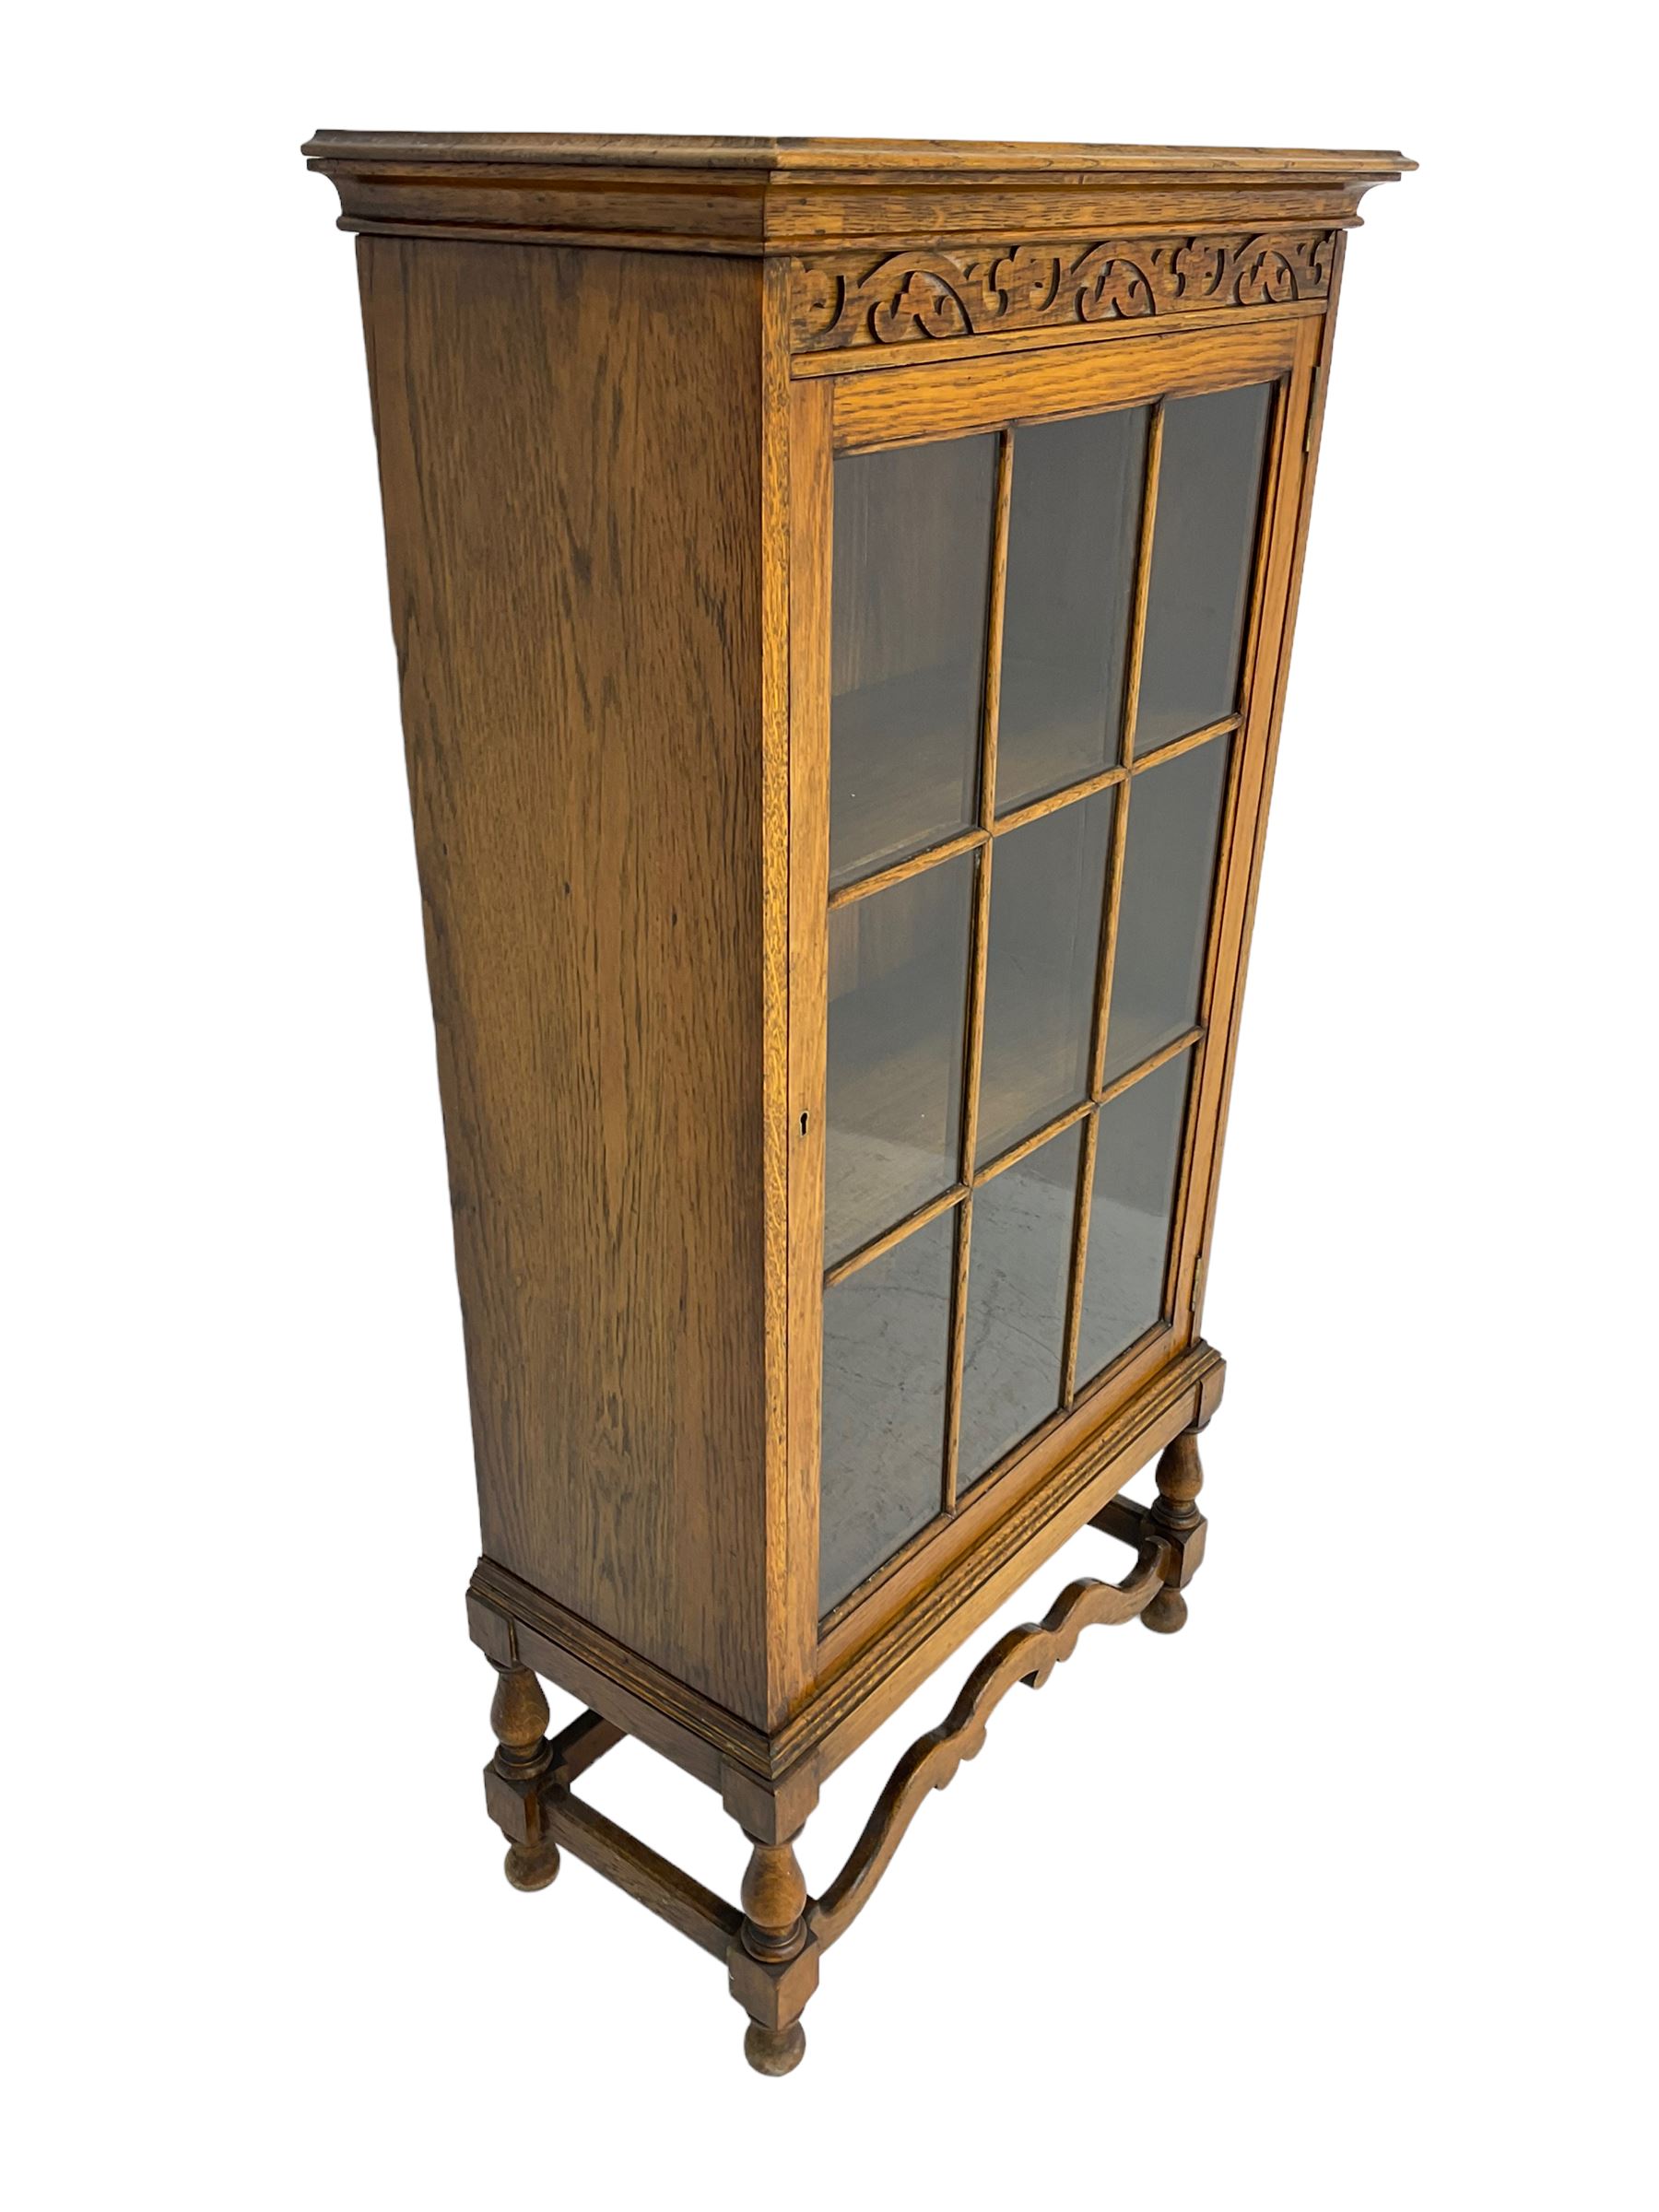 Early 20th century oak bookcase display cabinet - Image 4 of 6